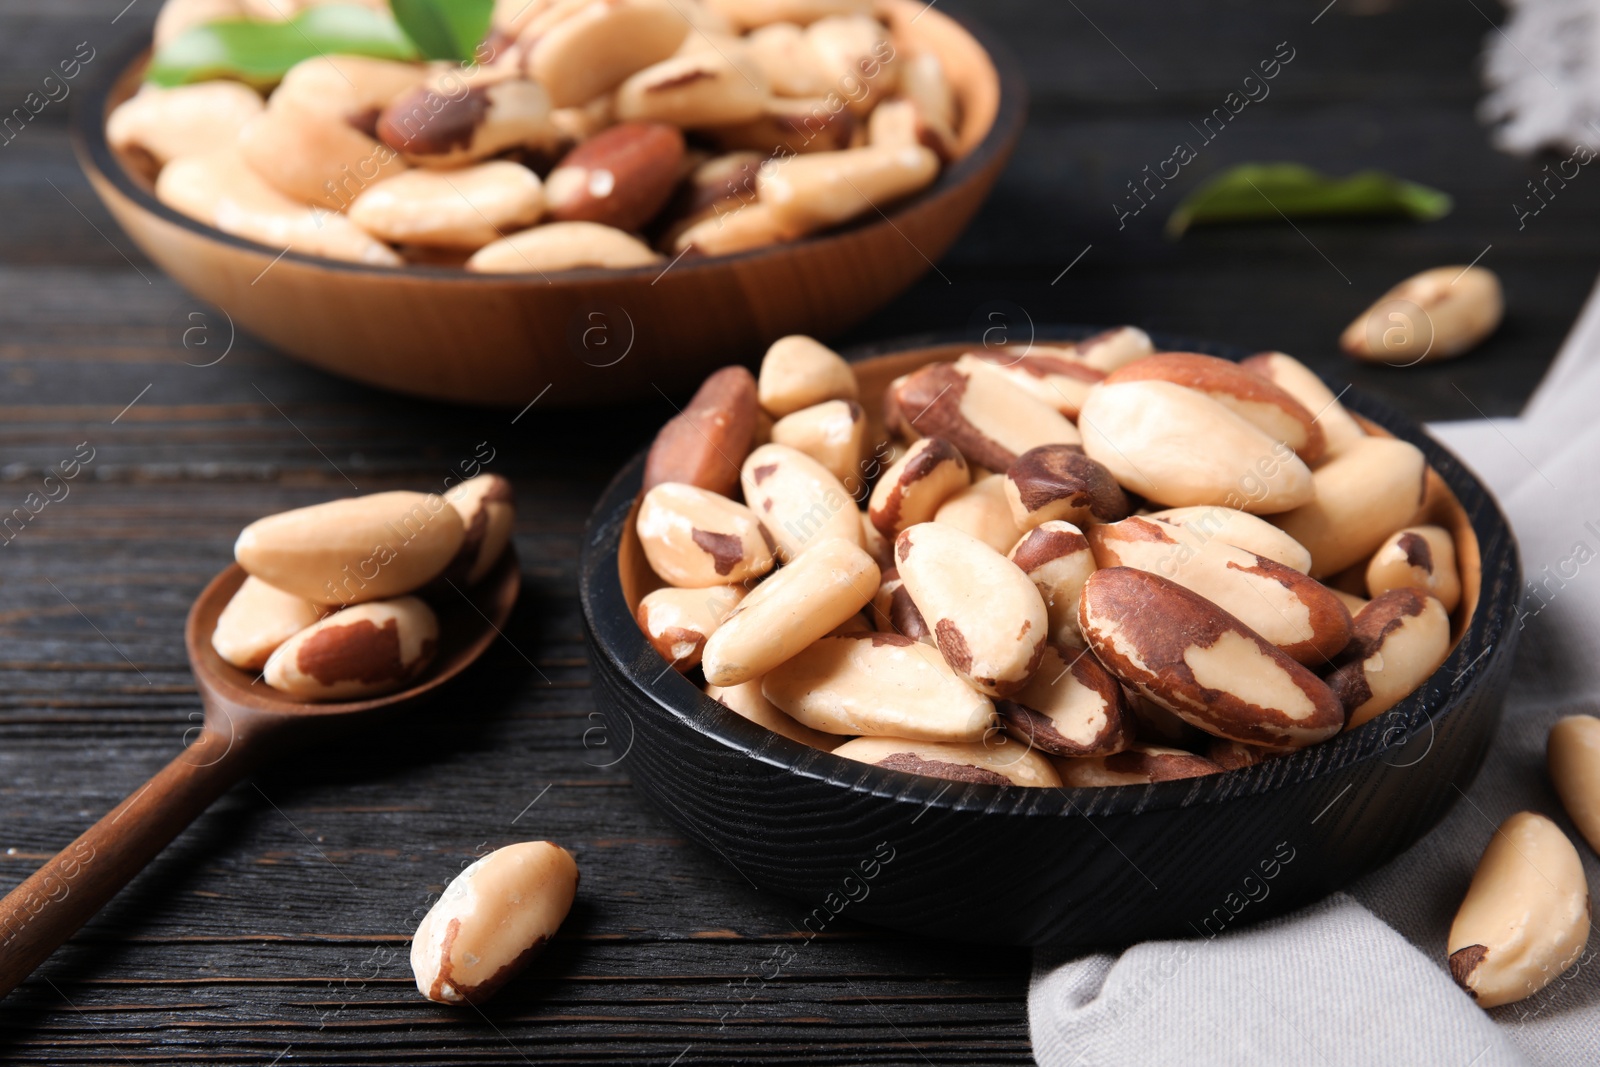 Photo of Plate with tasty Brazil nuts on wooden table